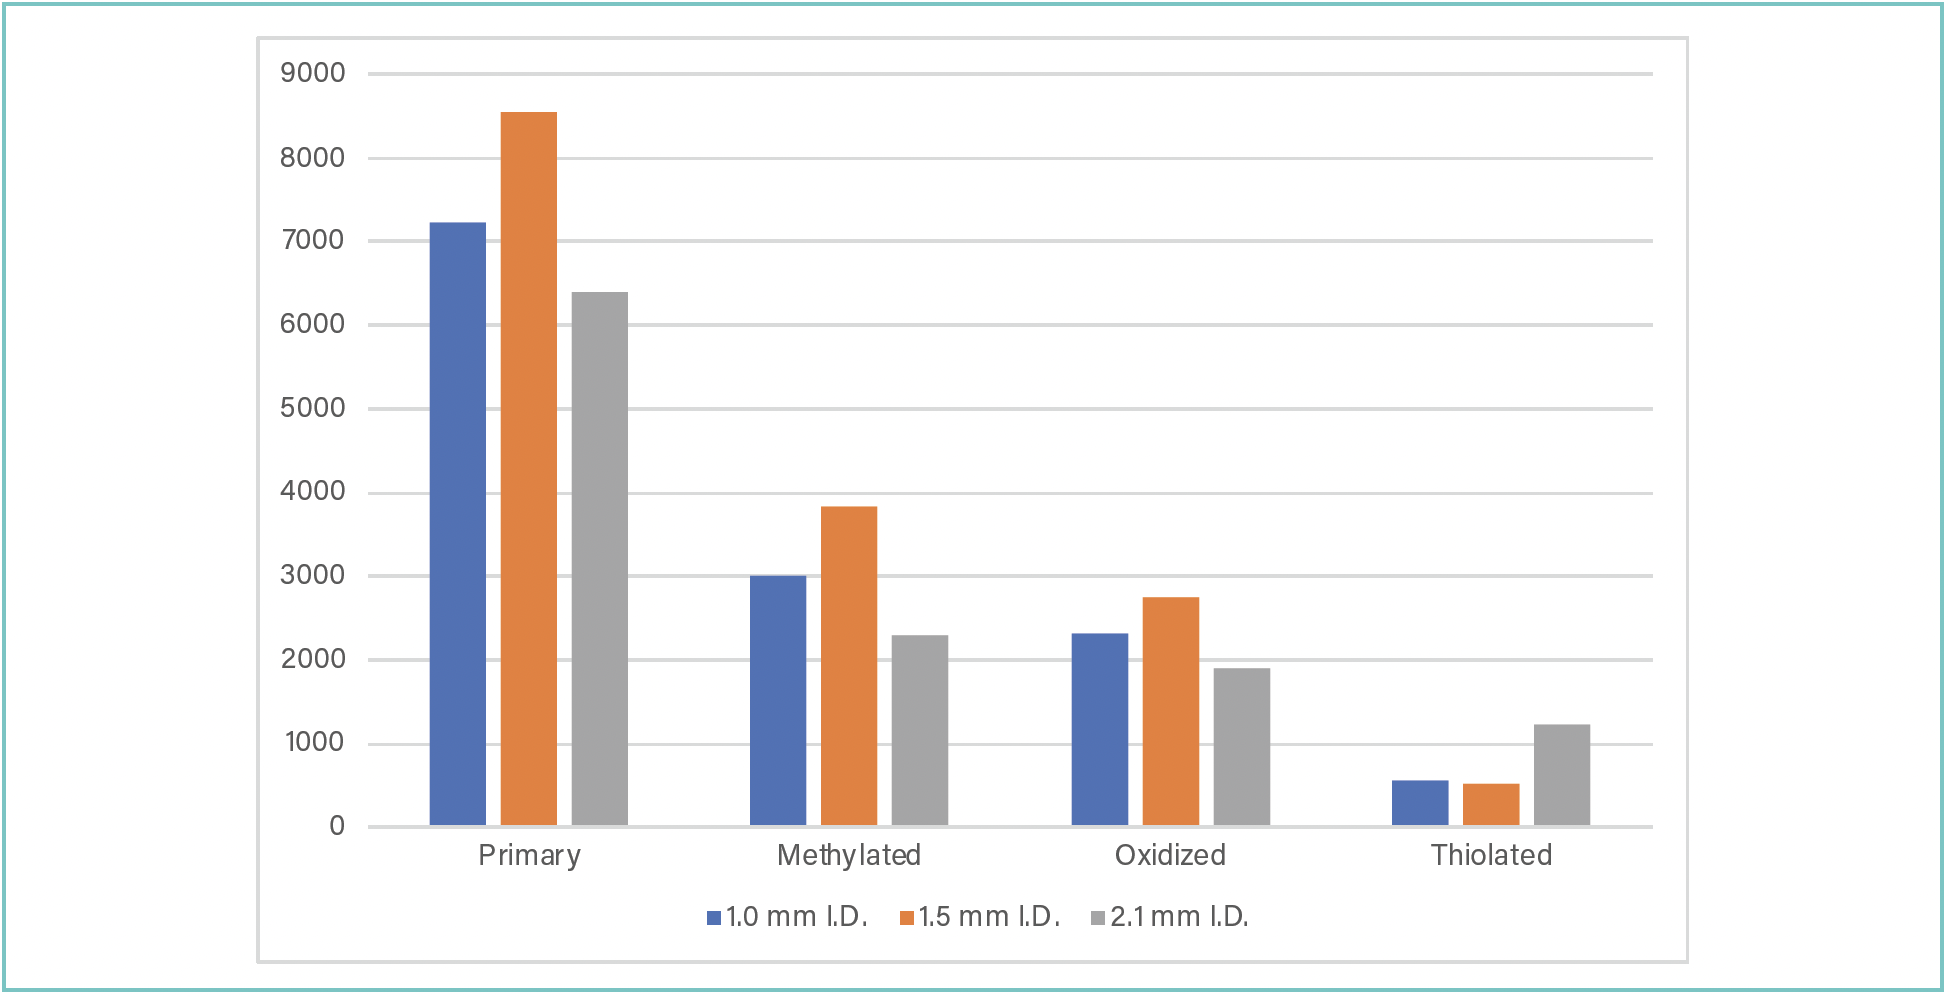 FIGURE 3: Sensitivity (peak height as y-axis) vs. column i.d. (as x-axis): Comparison of peak heights of modified and unmodified oligonucleotides analyzed with the BIOshell A160 Peptide C18 column (15 cm length) with different i.d.’s. Conditions: Column: BIOshell A160 Peptide C18, 15 cm × 2.1-, 1.5-, or 1.0-mm i.d., 2.7 μm; Mobile Phase: [A] water (15 mM triethylamine [TEA], 400 mM hexafluoroisoproanol [HFIP]), [B] water (15 mM TEA, 400 mM HFIP): methanol (40:60 v/v); Gradient: 15 to 50% B in 15 min; Flow rate: 0.1 mL/min (1.0-mm i.d.), 0.2 mL/min (1.5-mm i.d.), or 0.4 mL/min (2.1-mm i.d.); Column temp.: 70 °C; Detector: MSD, ESI-(+); Injection: 1.0 μL; Sample: Oligonucleotide mix; 100 μM, water (10 mM Tris-EDTA, pH 8.0).